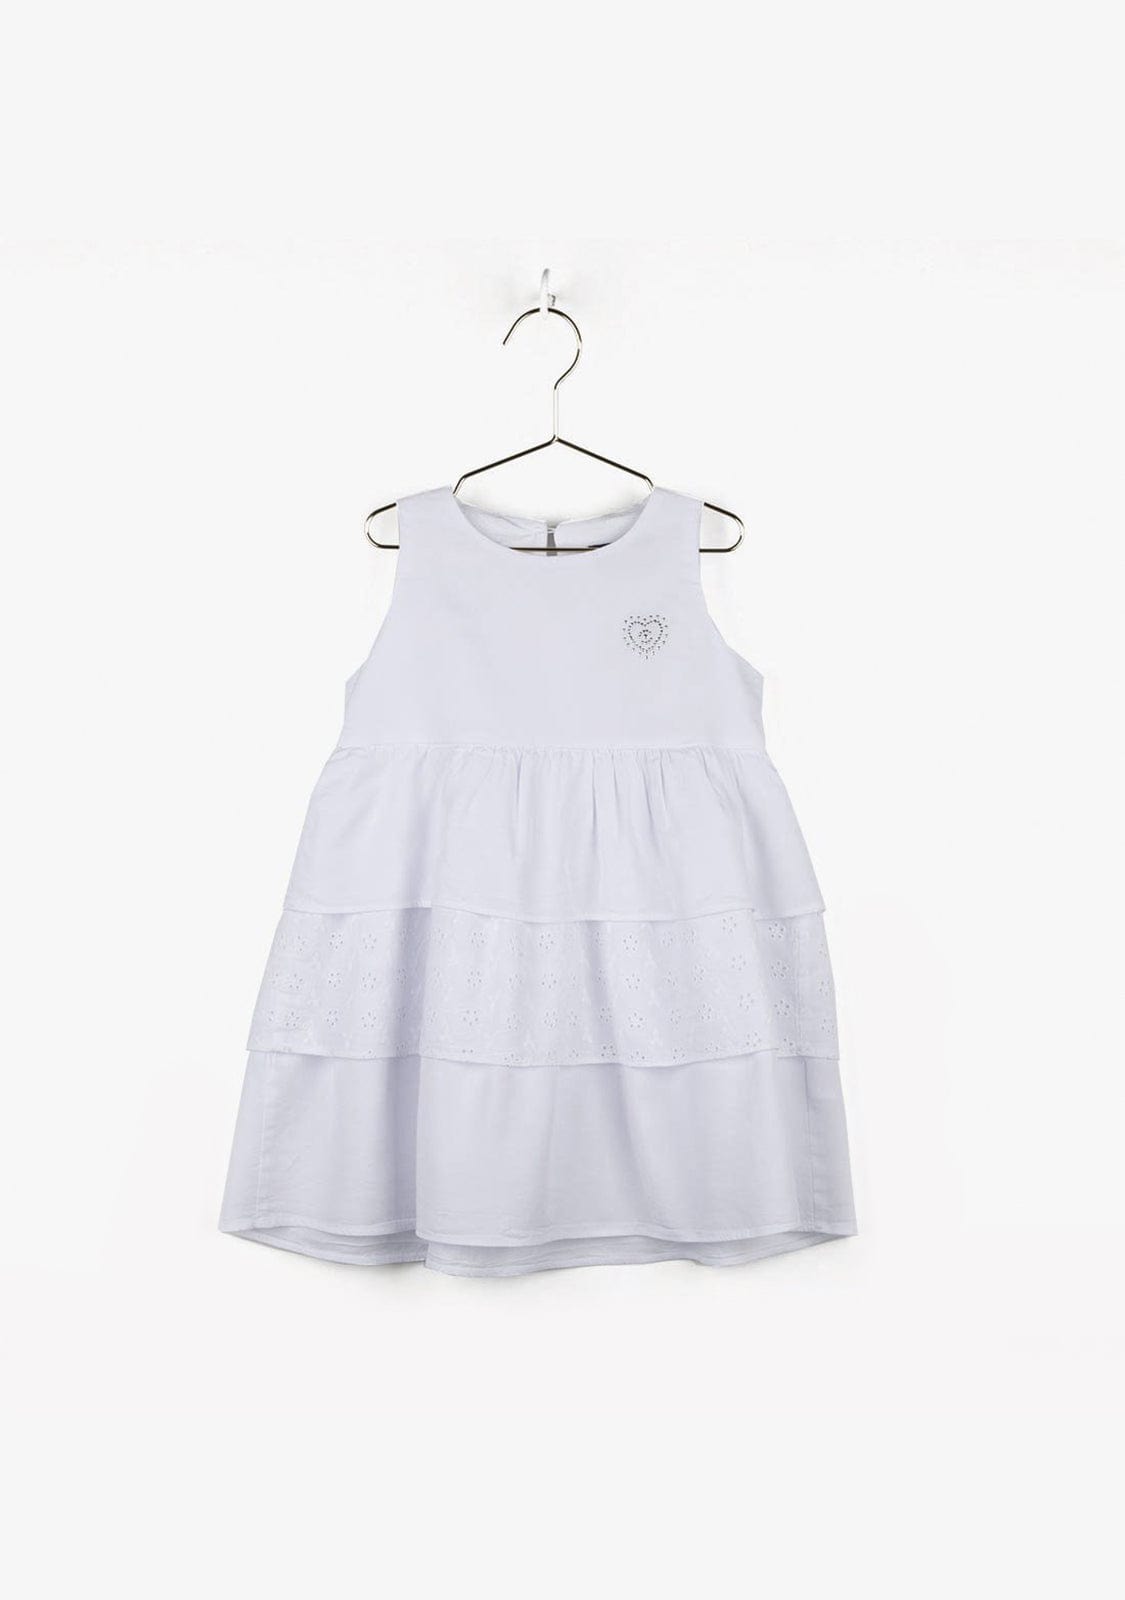 CONGUITOS TEXTIL Clothing Girl's White Ruffled Dress